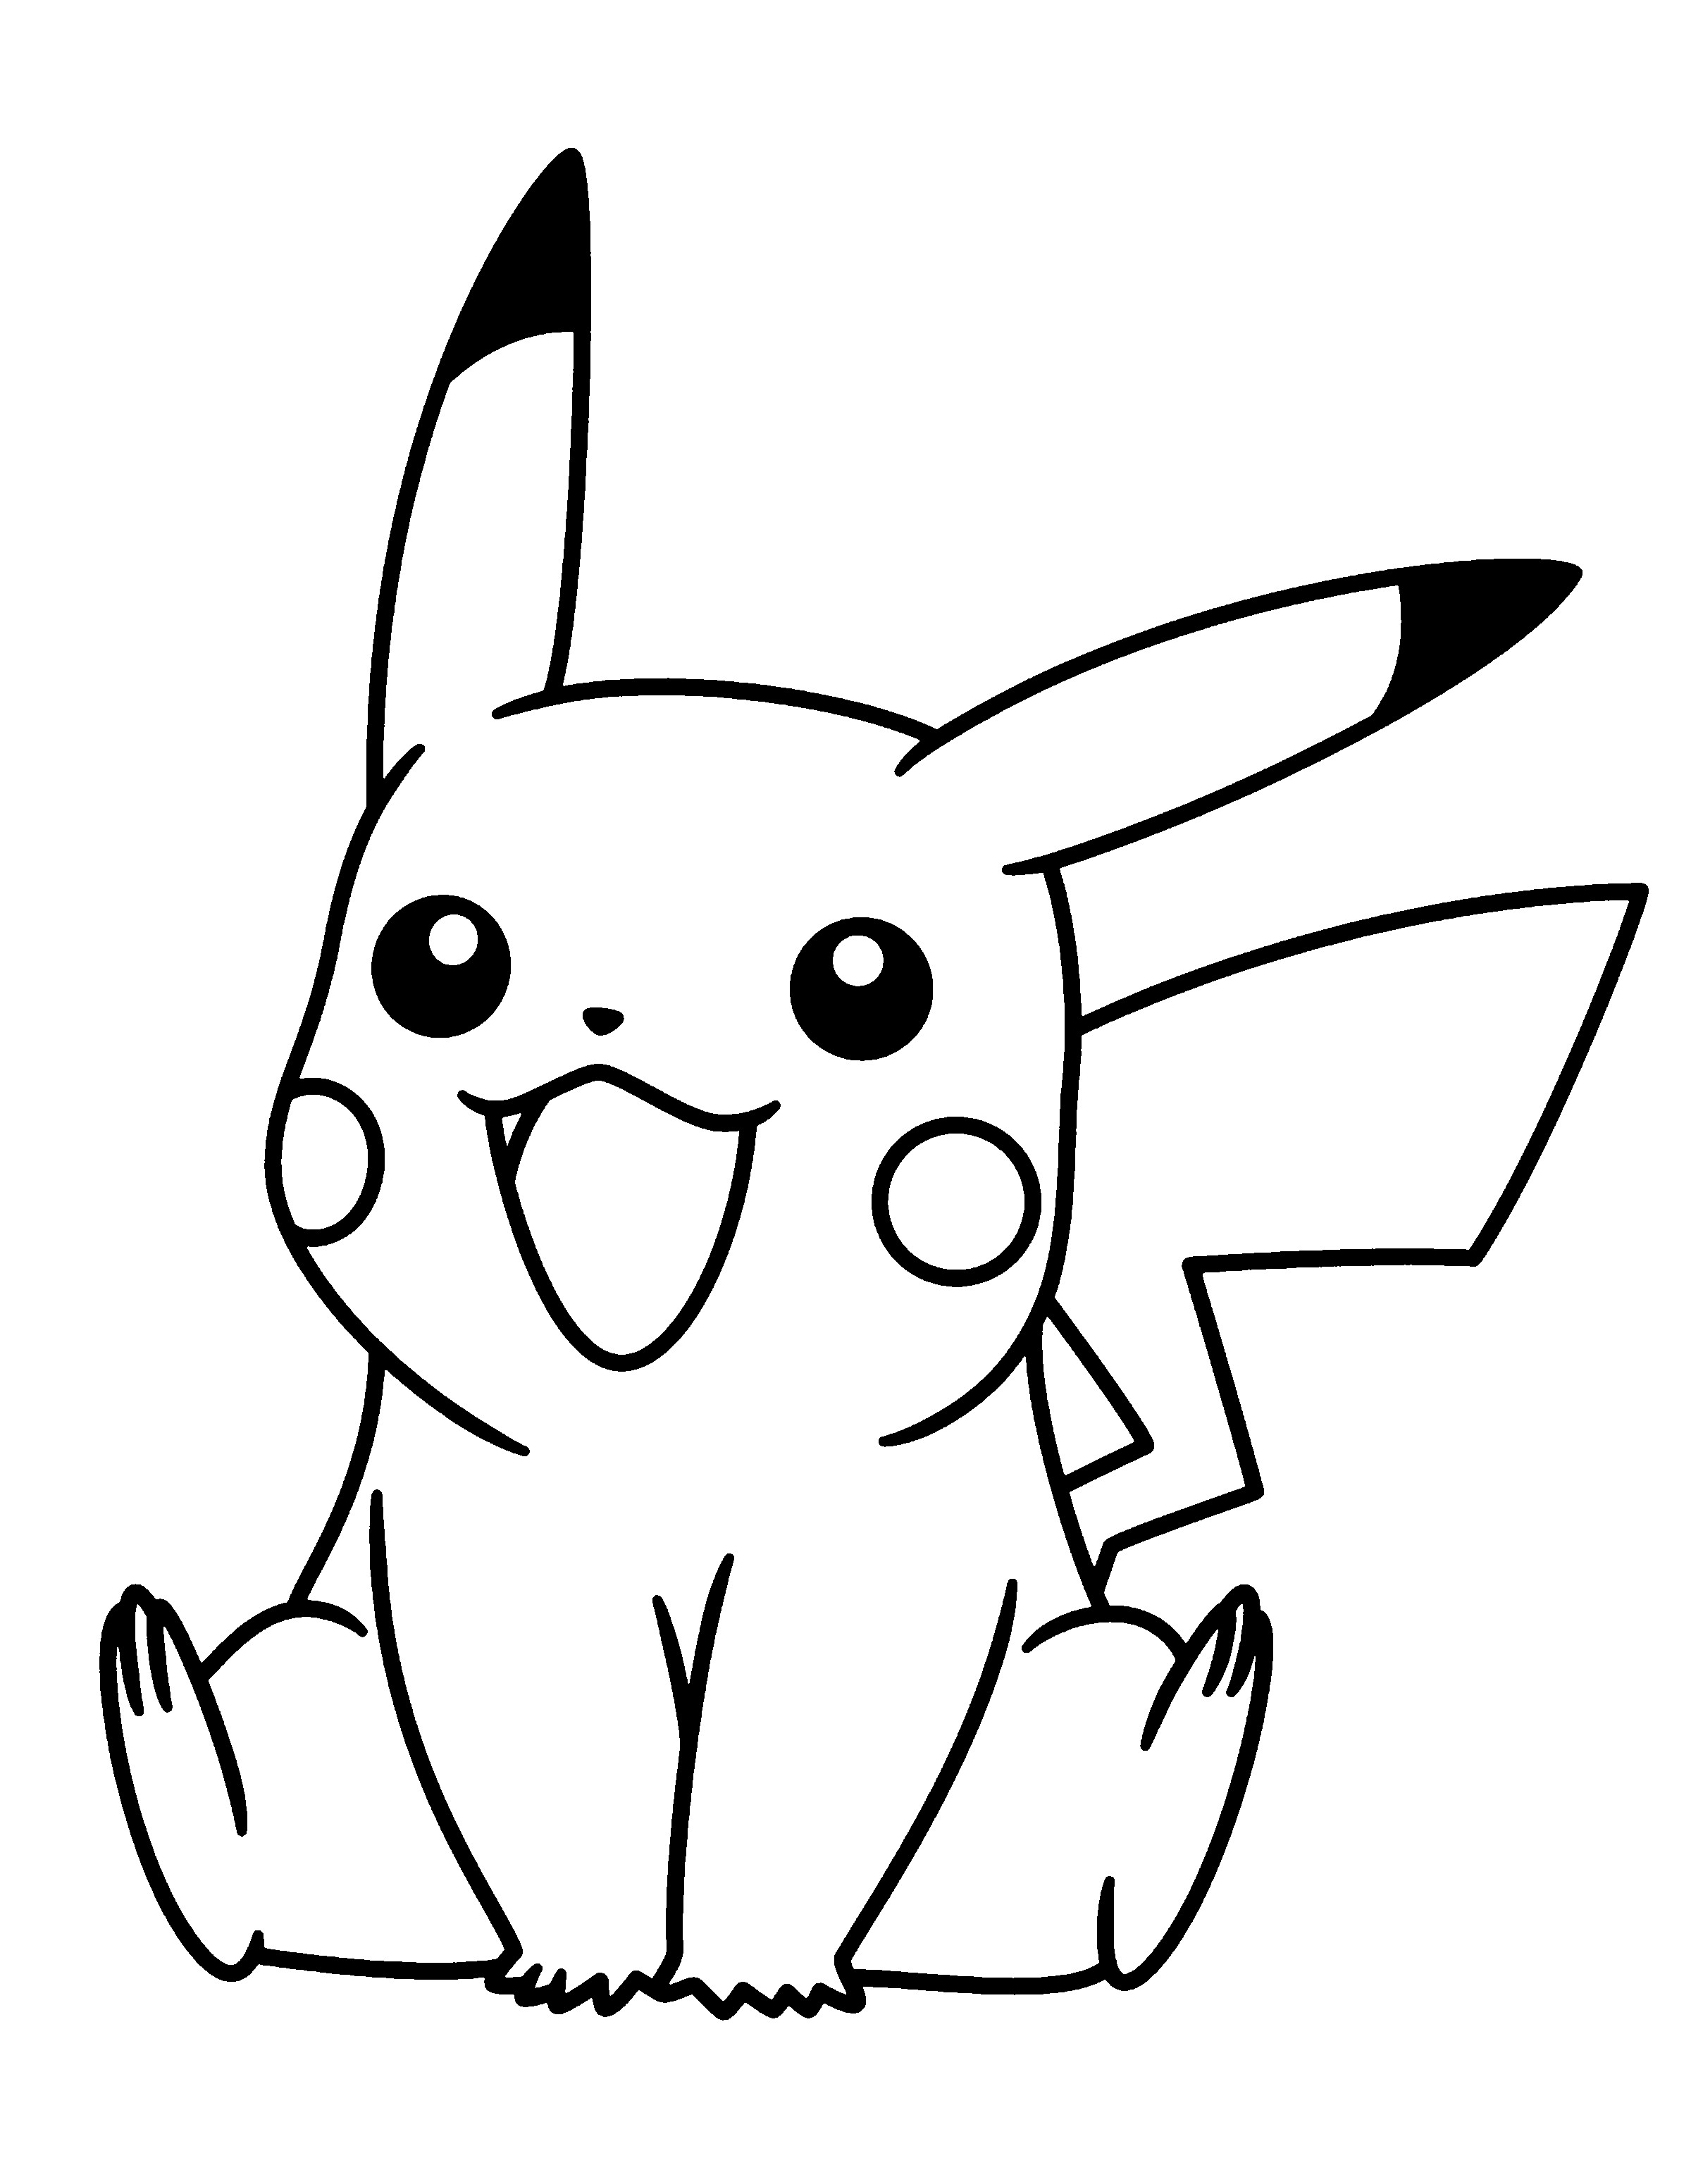 Eevee and Pikachu Coloring Pages Wallpaper